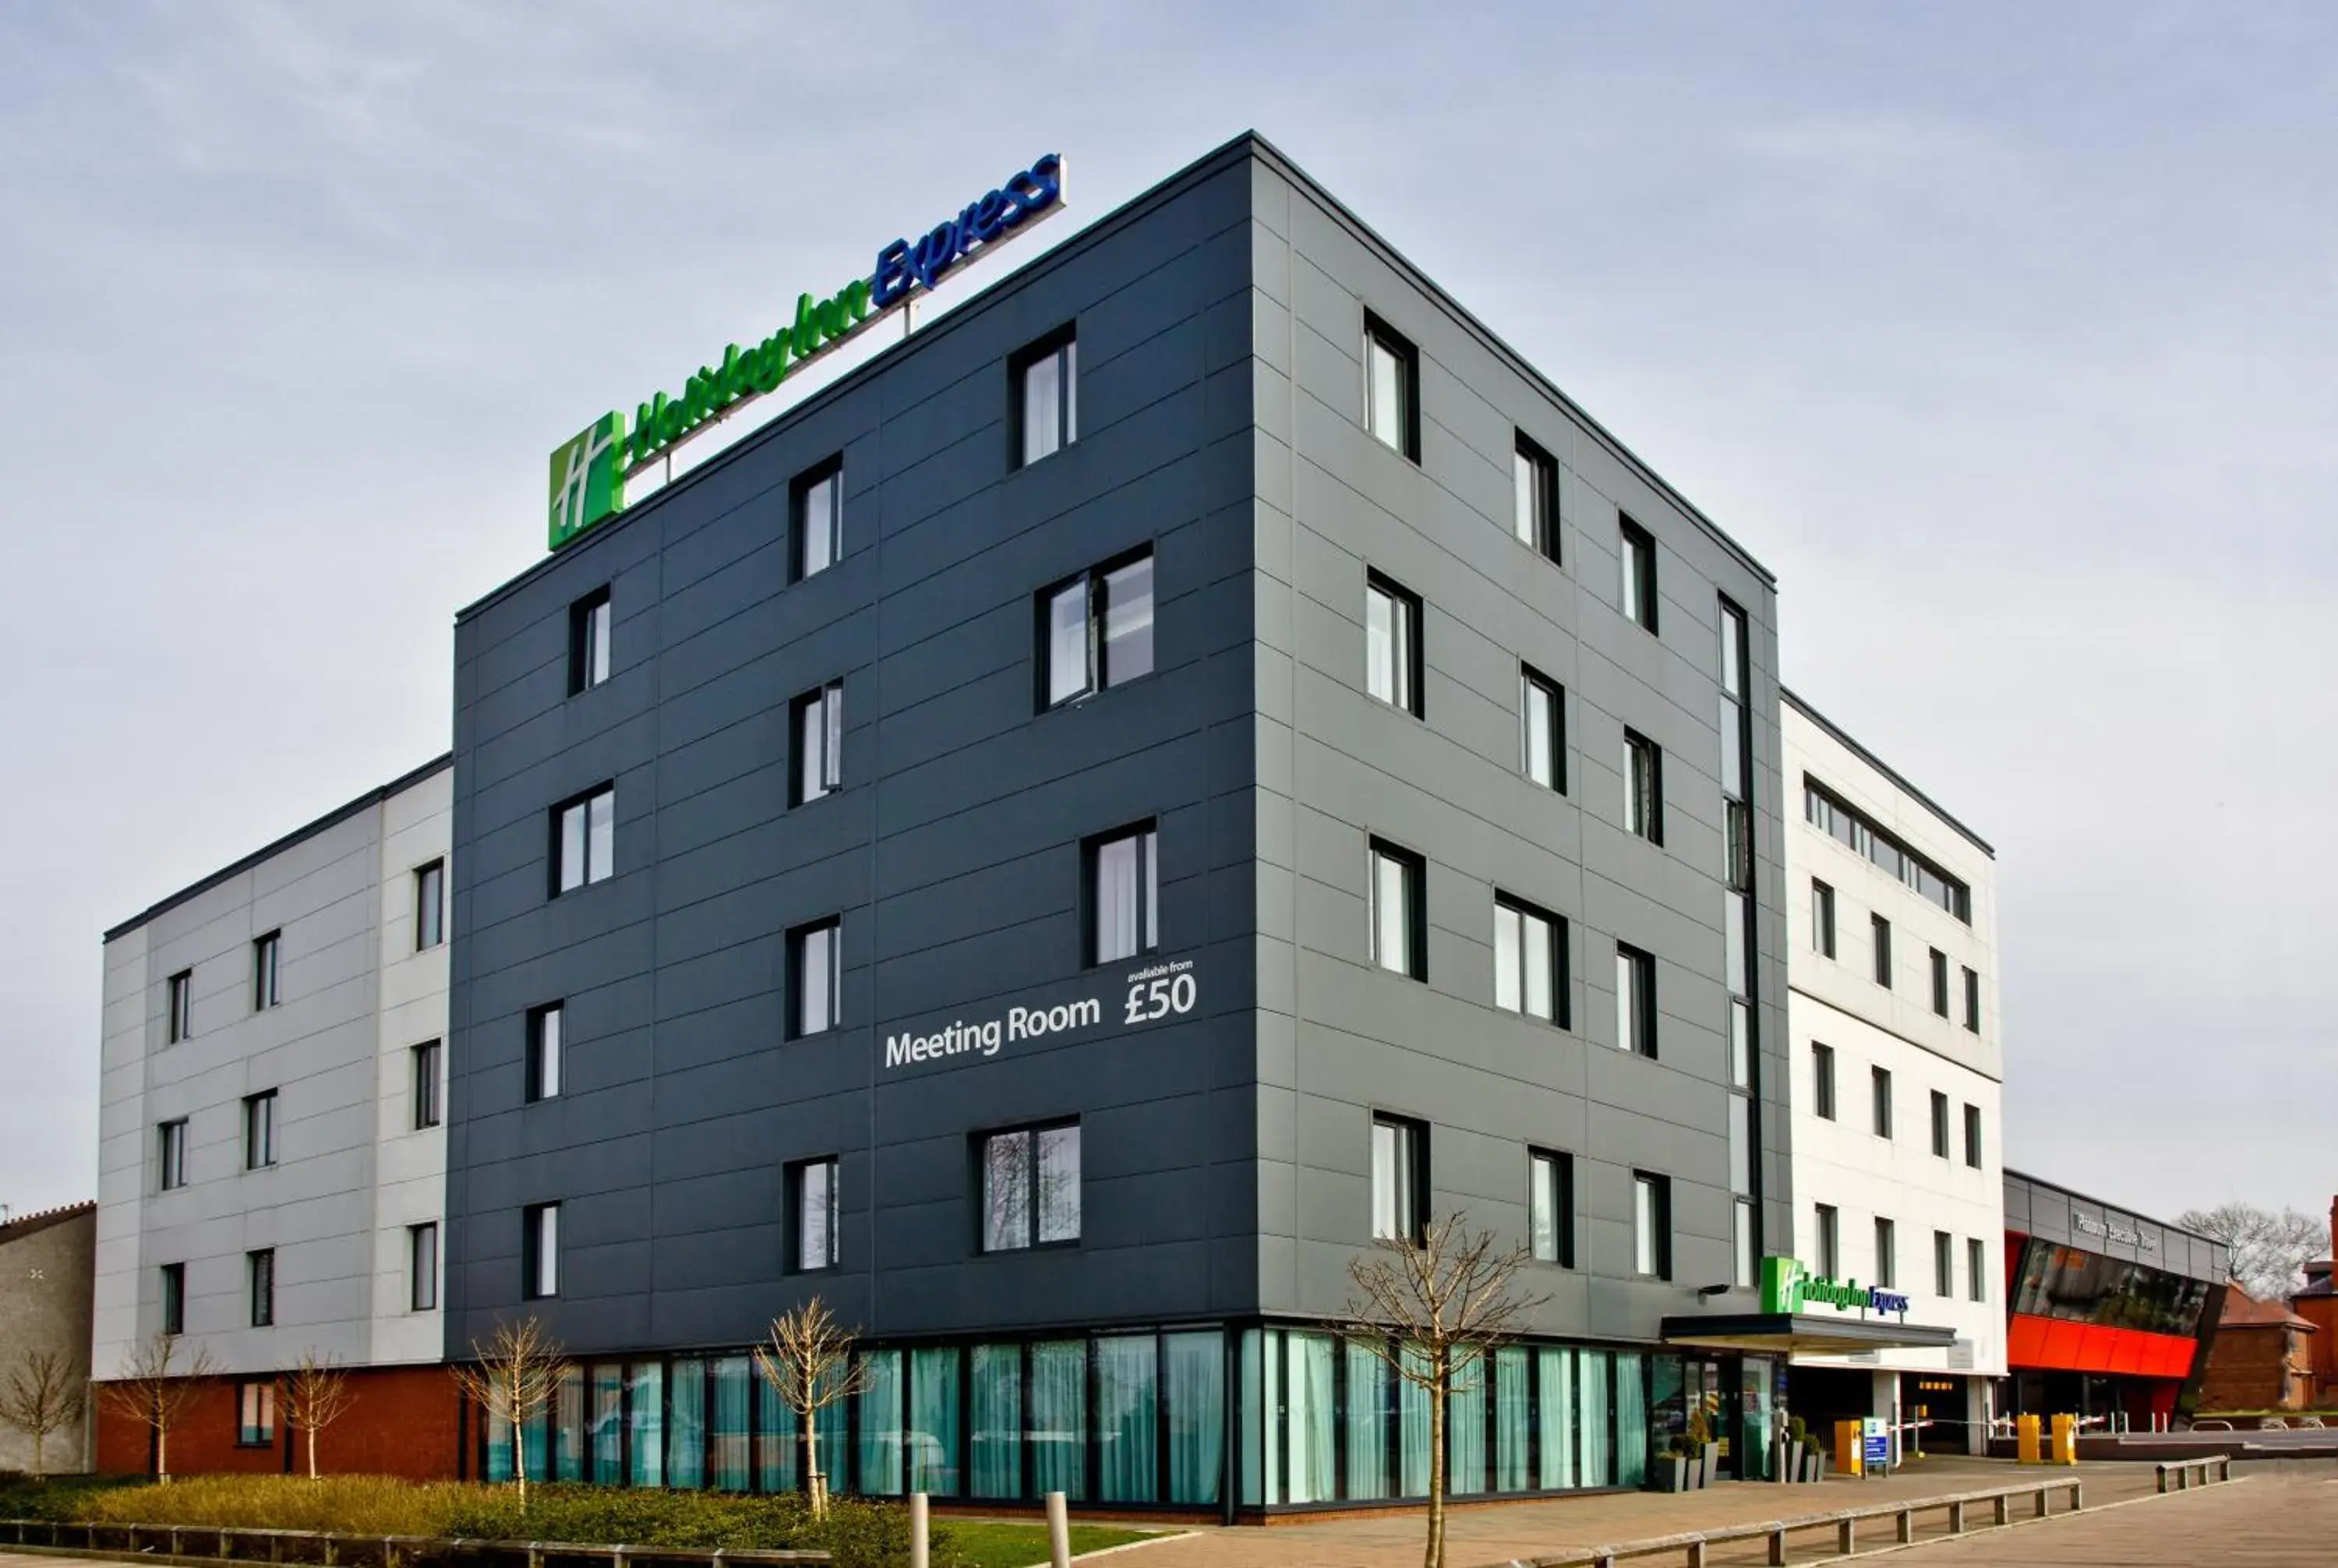 Property Building in Holiday Inn Express Birmingham-South A45